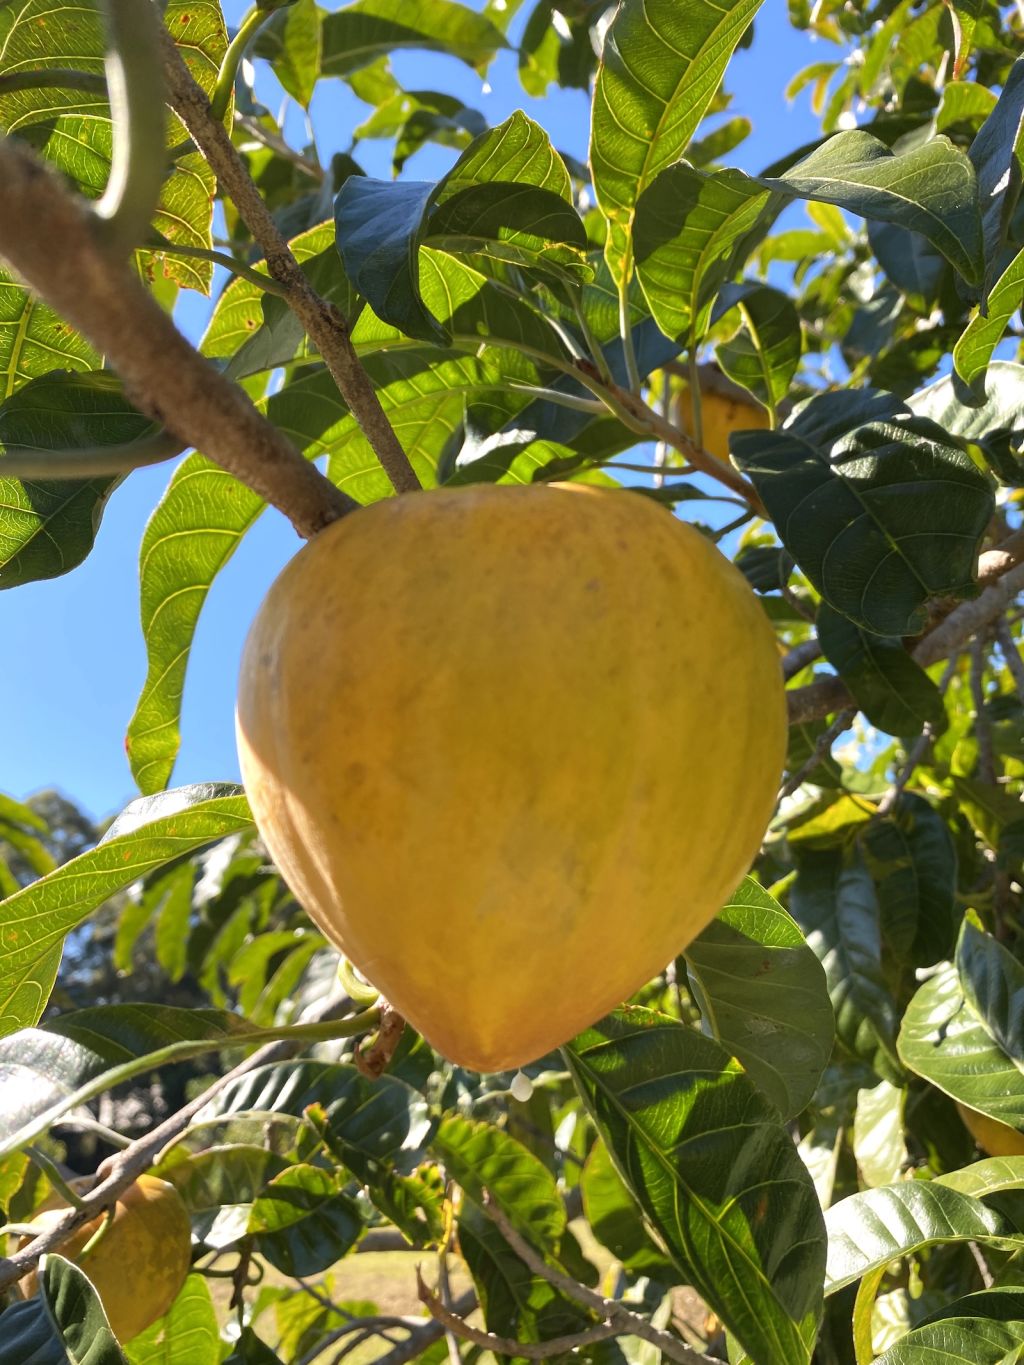 Yellow Sapote, also known as canistel, tastes like butterscotch, says John Picone. Photo: Vivienne Pearson